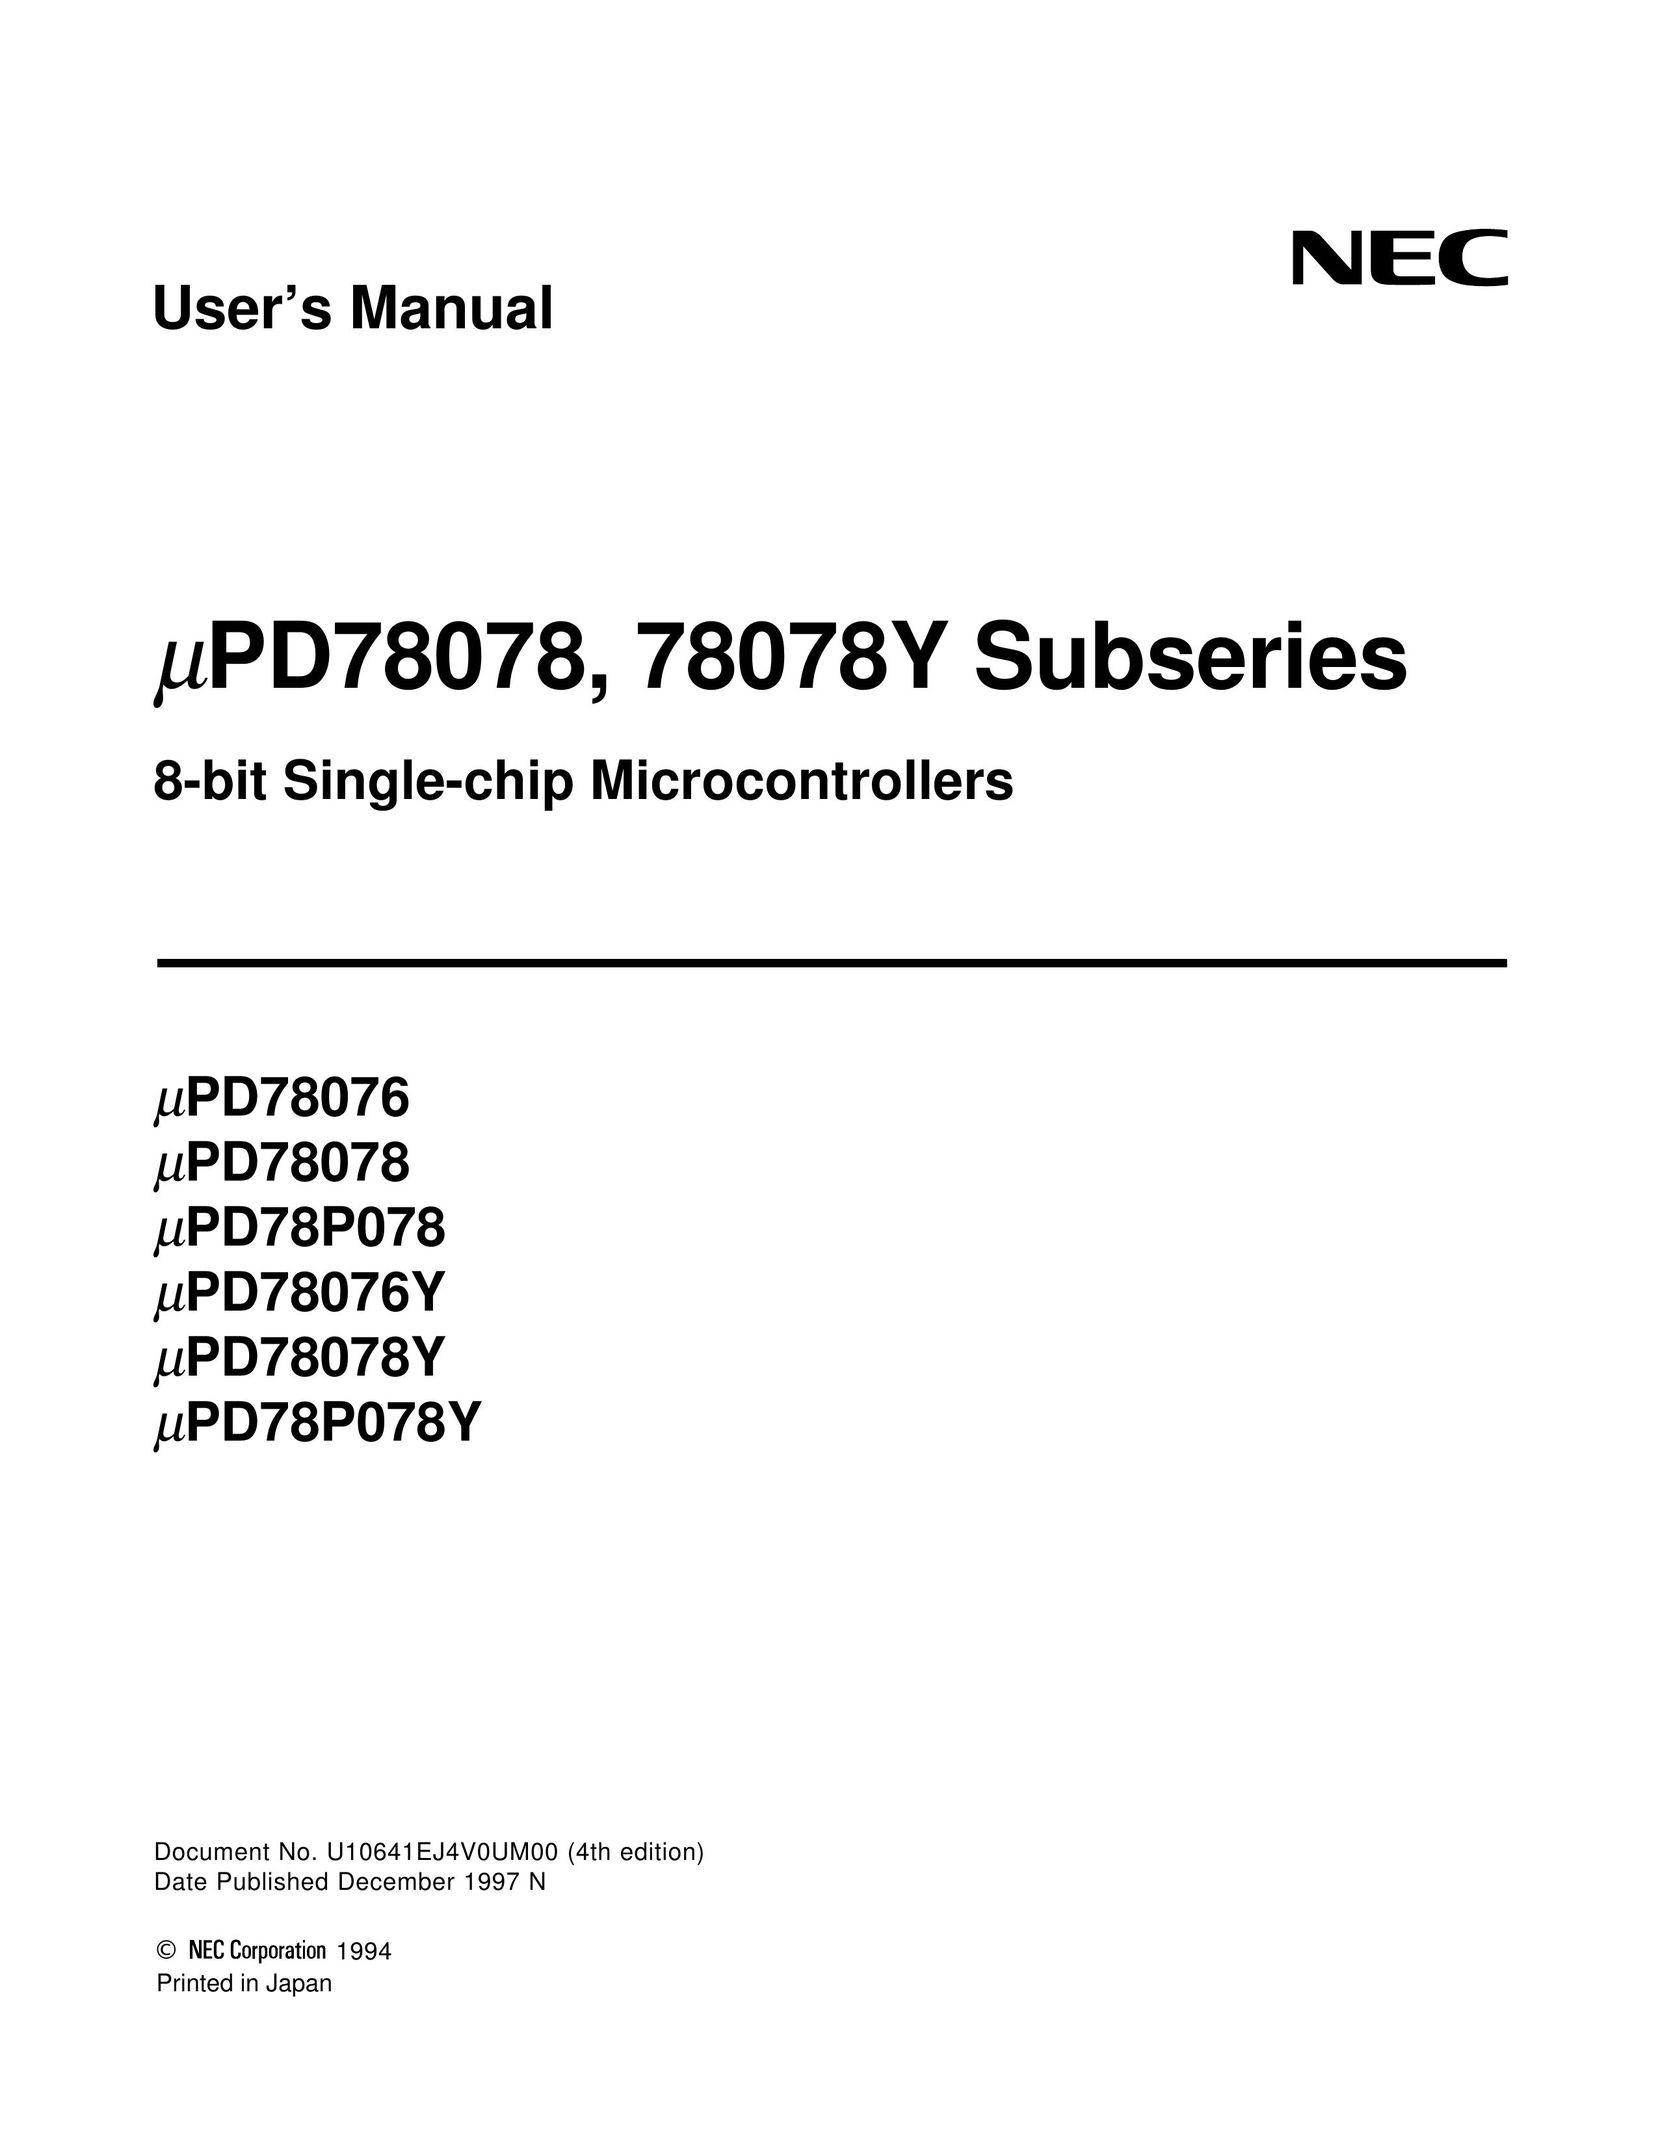 NEC PD78076 Network Card User Manual